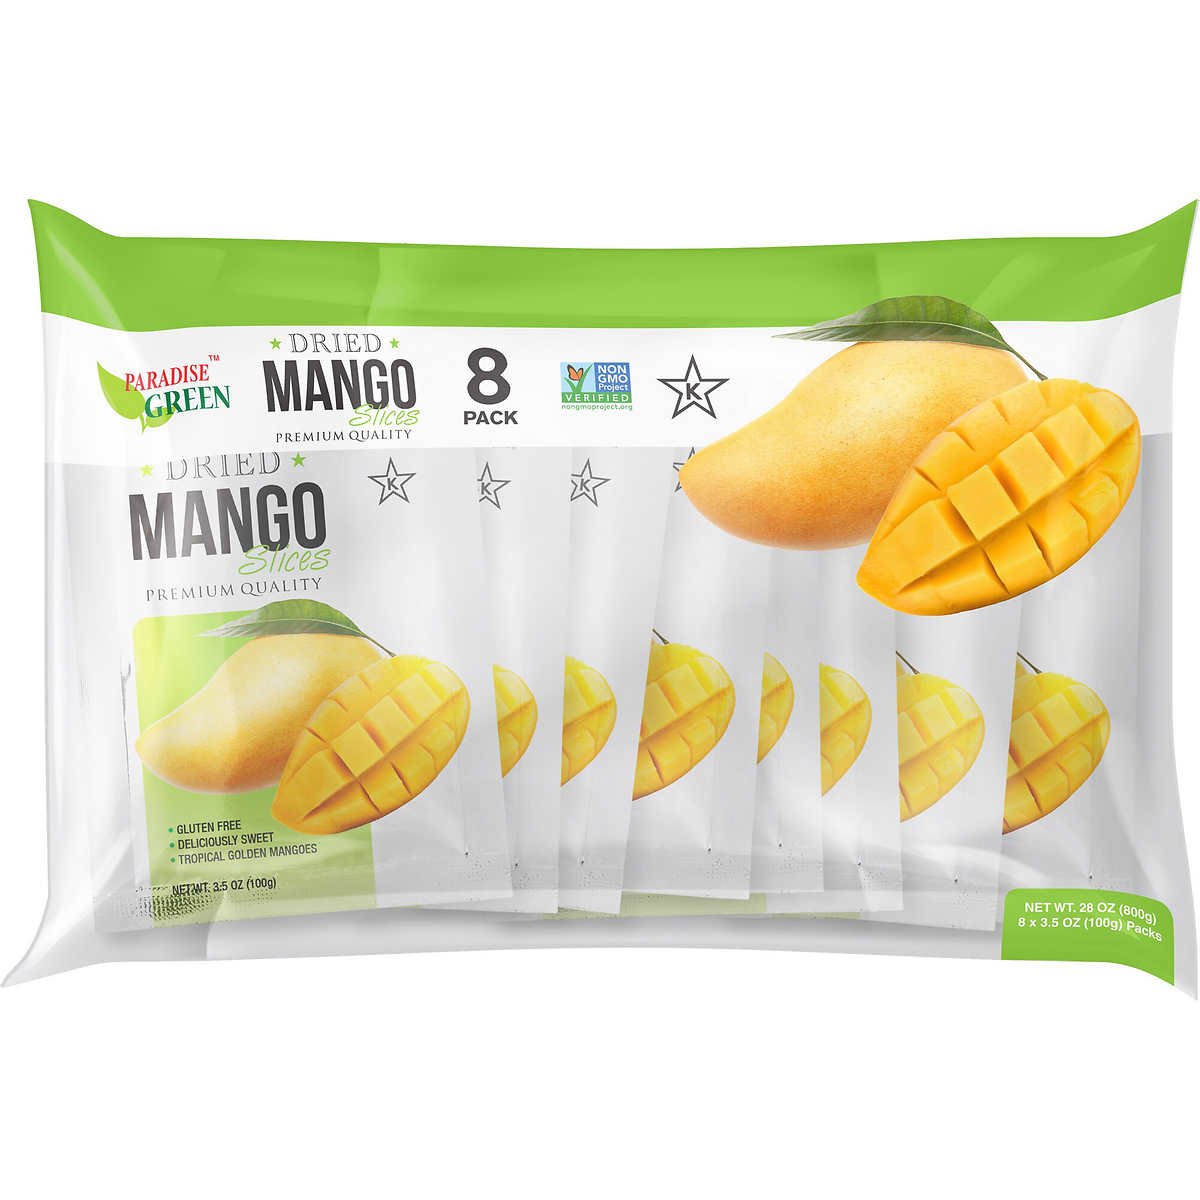 Image of YMangoSsnack-Paradise Green Premium Dried Mango Slices Deliciously Sweet, good source of vitamin C